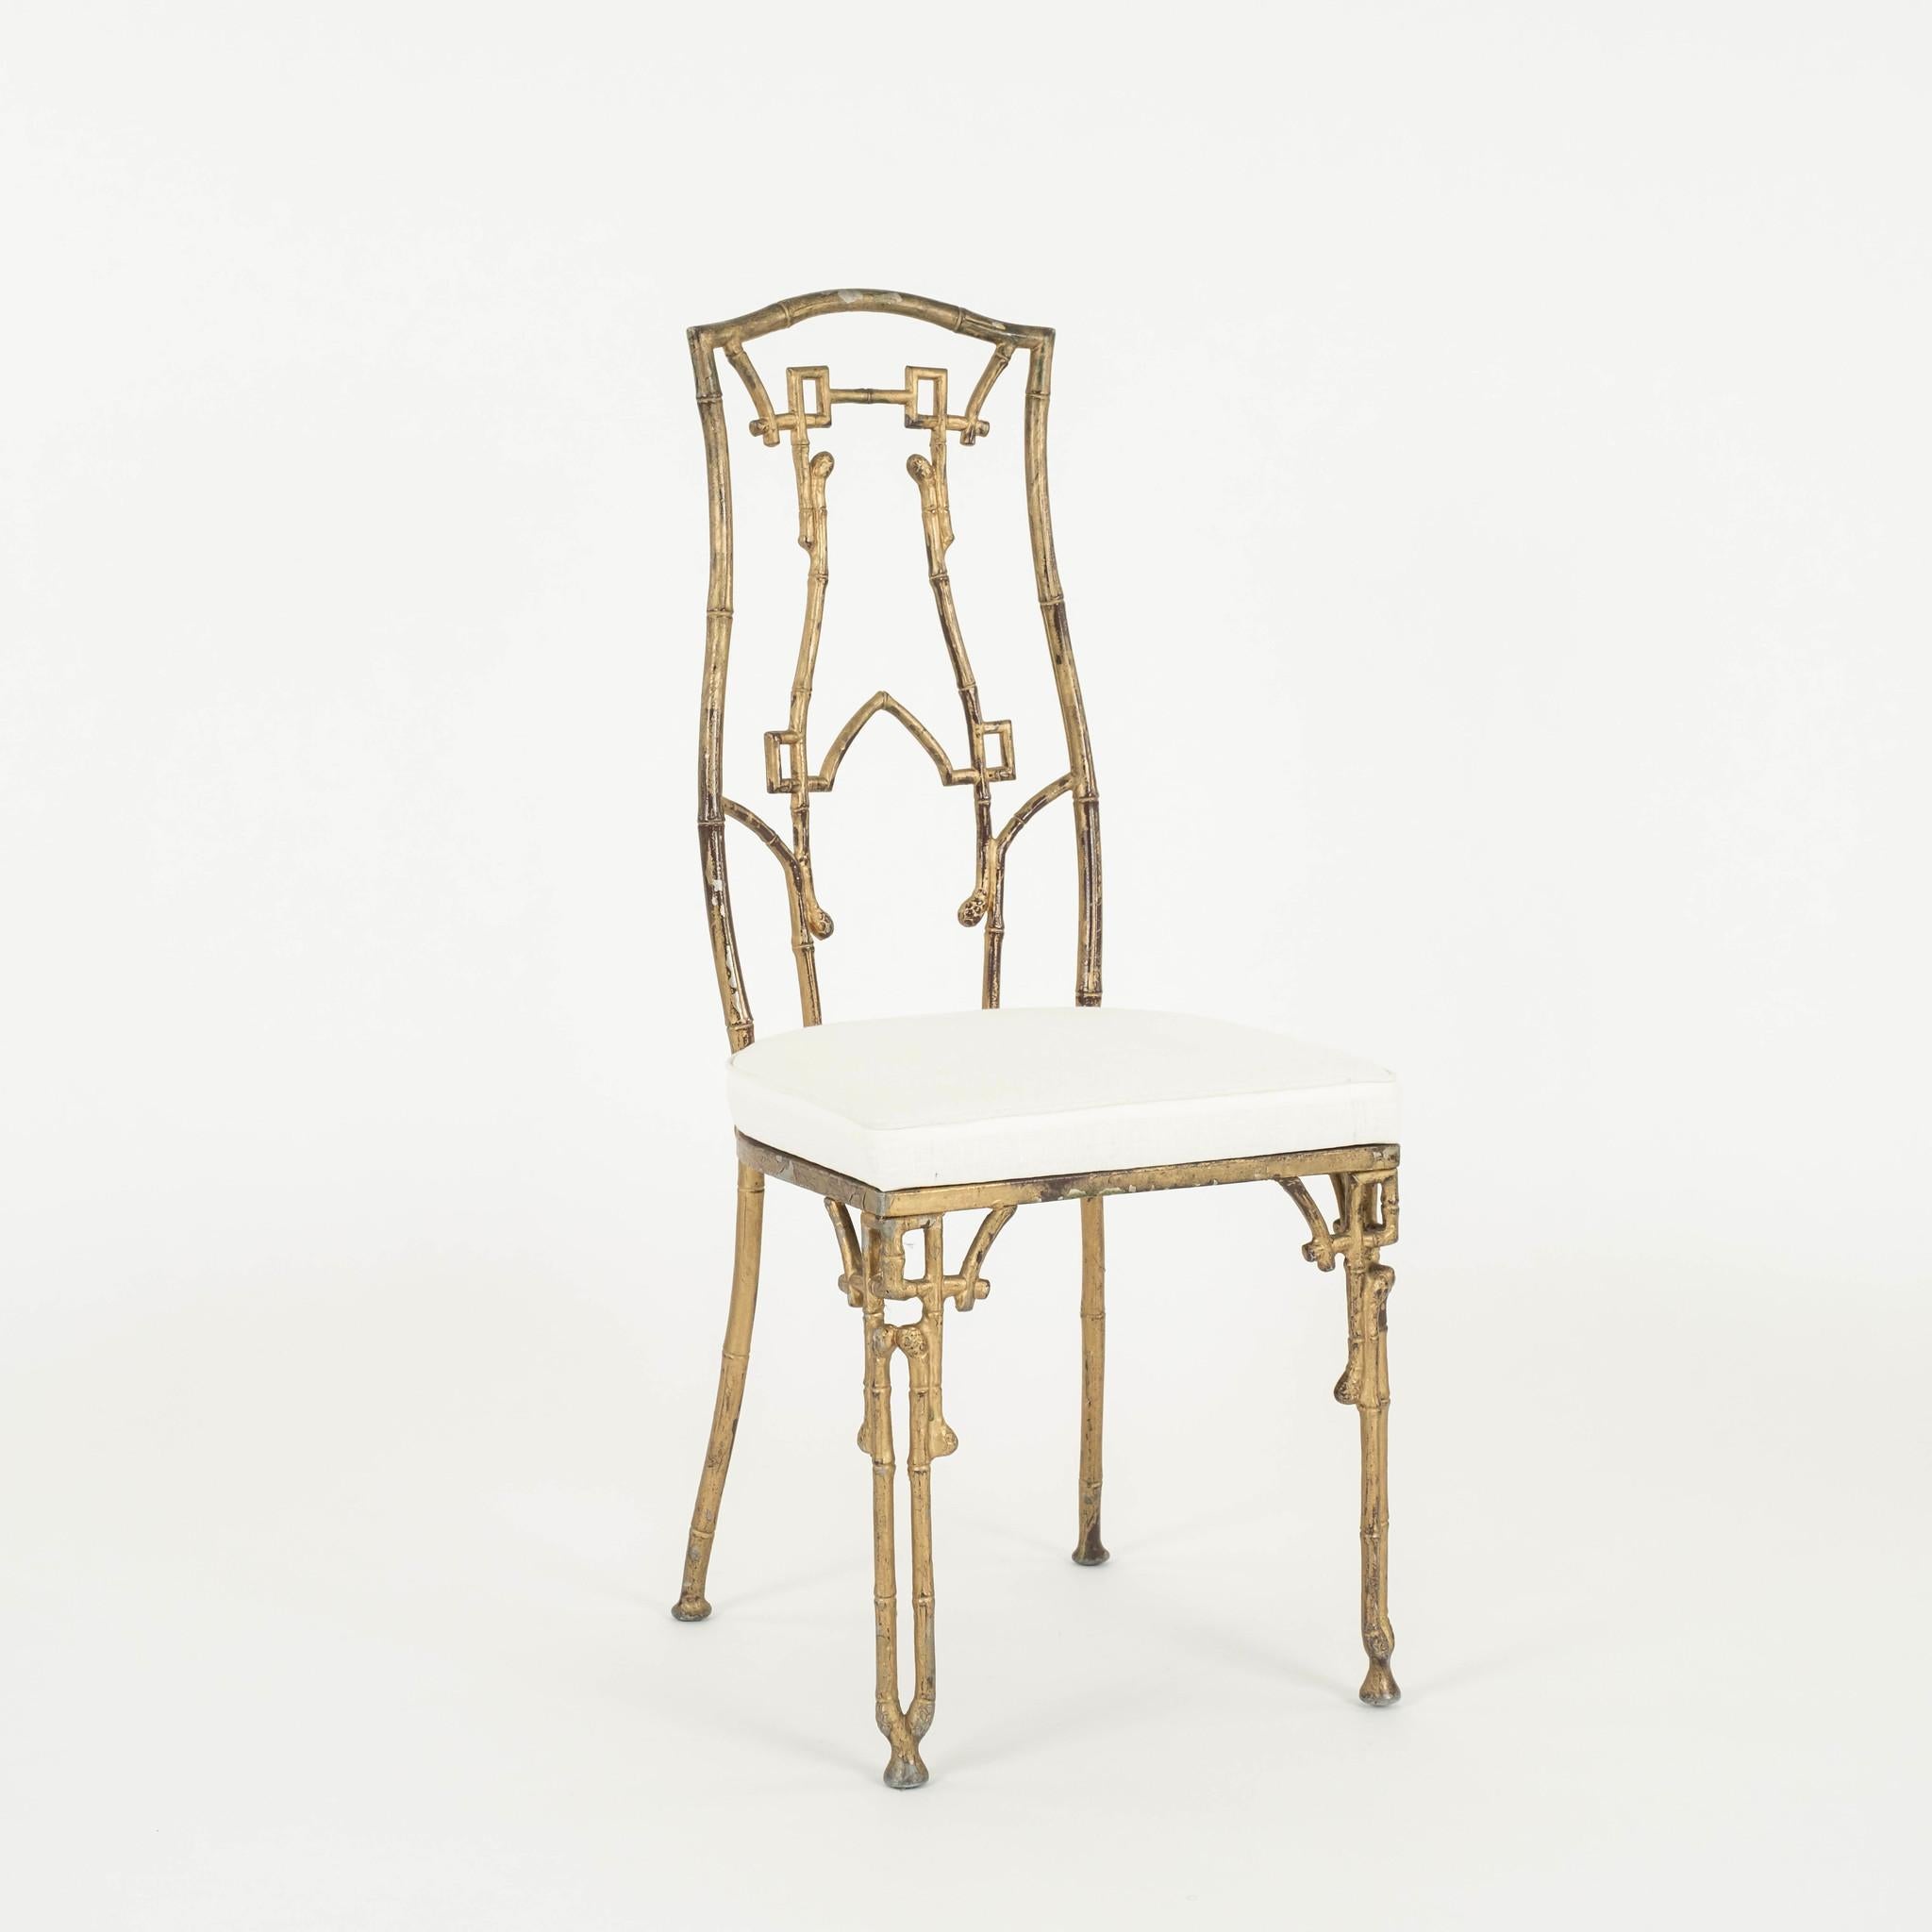 Vintage aesthetic style gilt metal bamboo side chair.